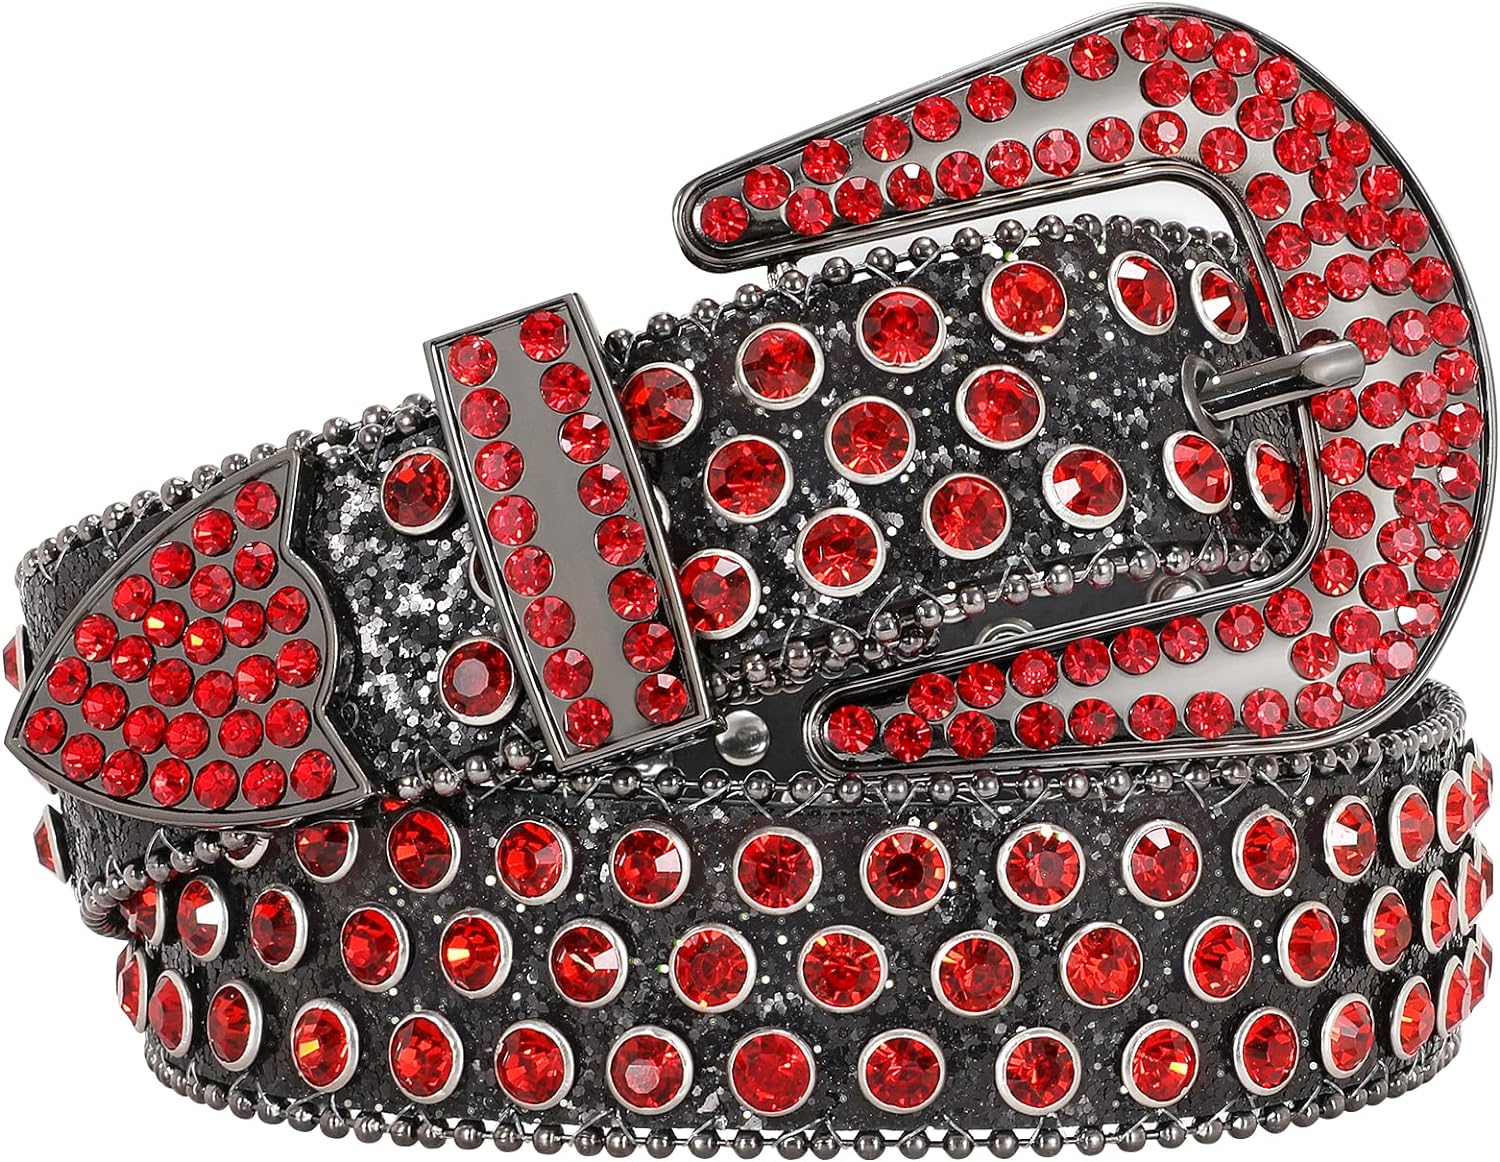 SUOSDEY Rhinestone Belt for Men Women Western Cowboy Cowgirl Bling Studded  Leather Belt for Jeans Pants